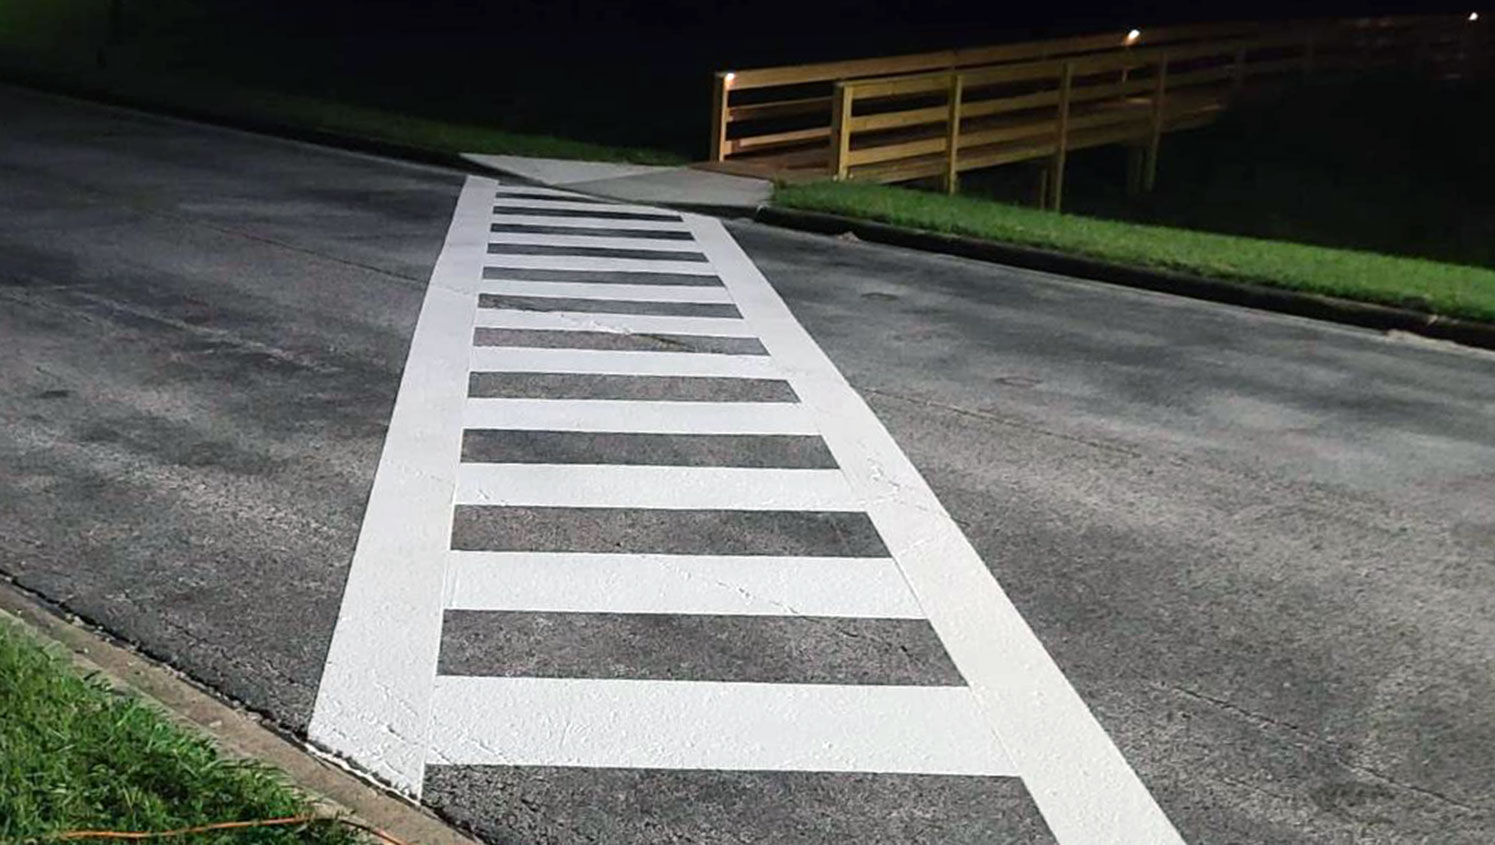 freshly striped thermoplastic crosswalk at The University of Houston-Clear Lake